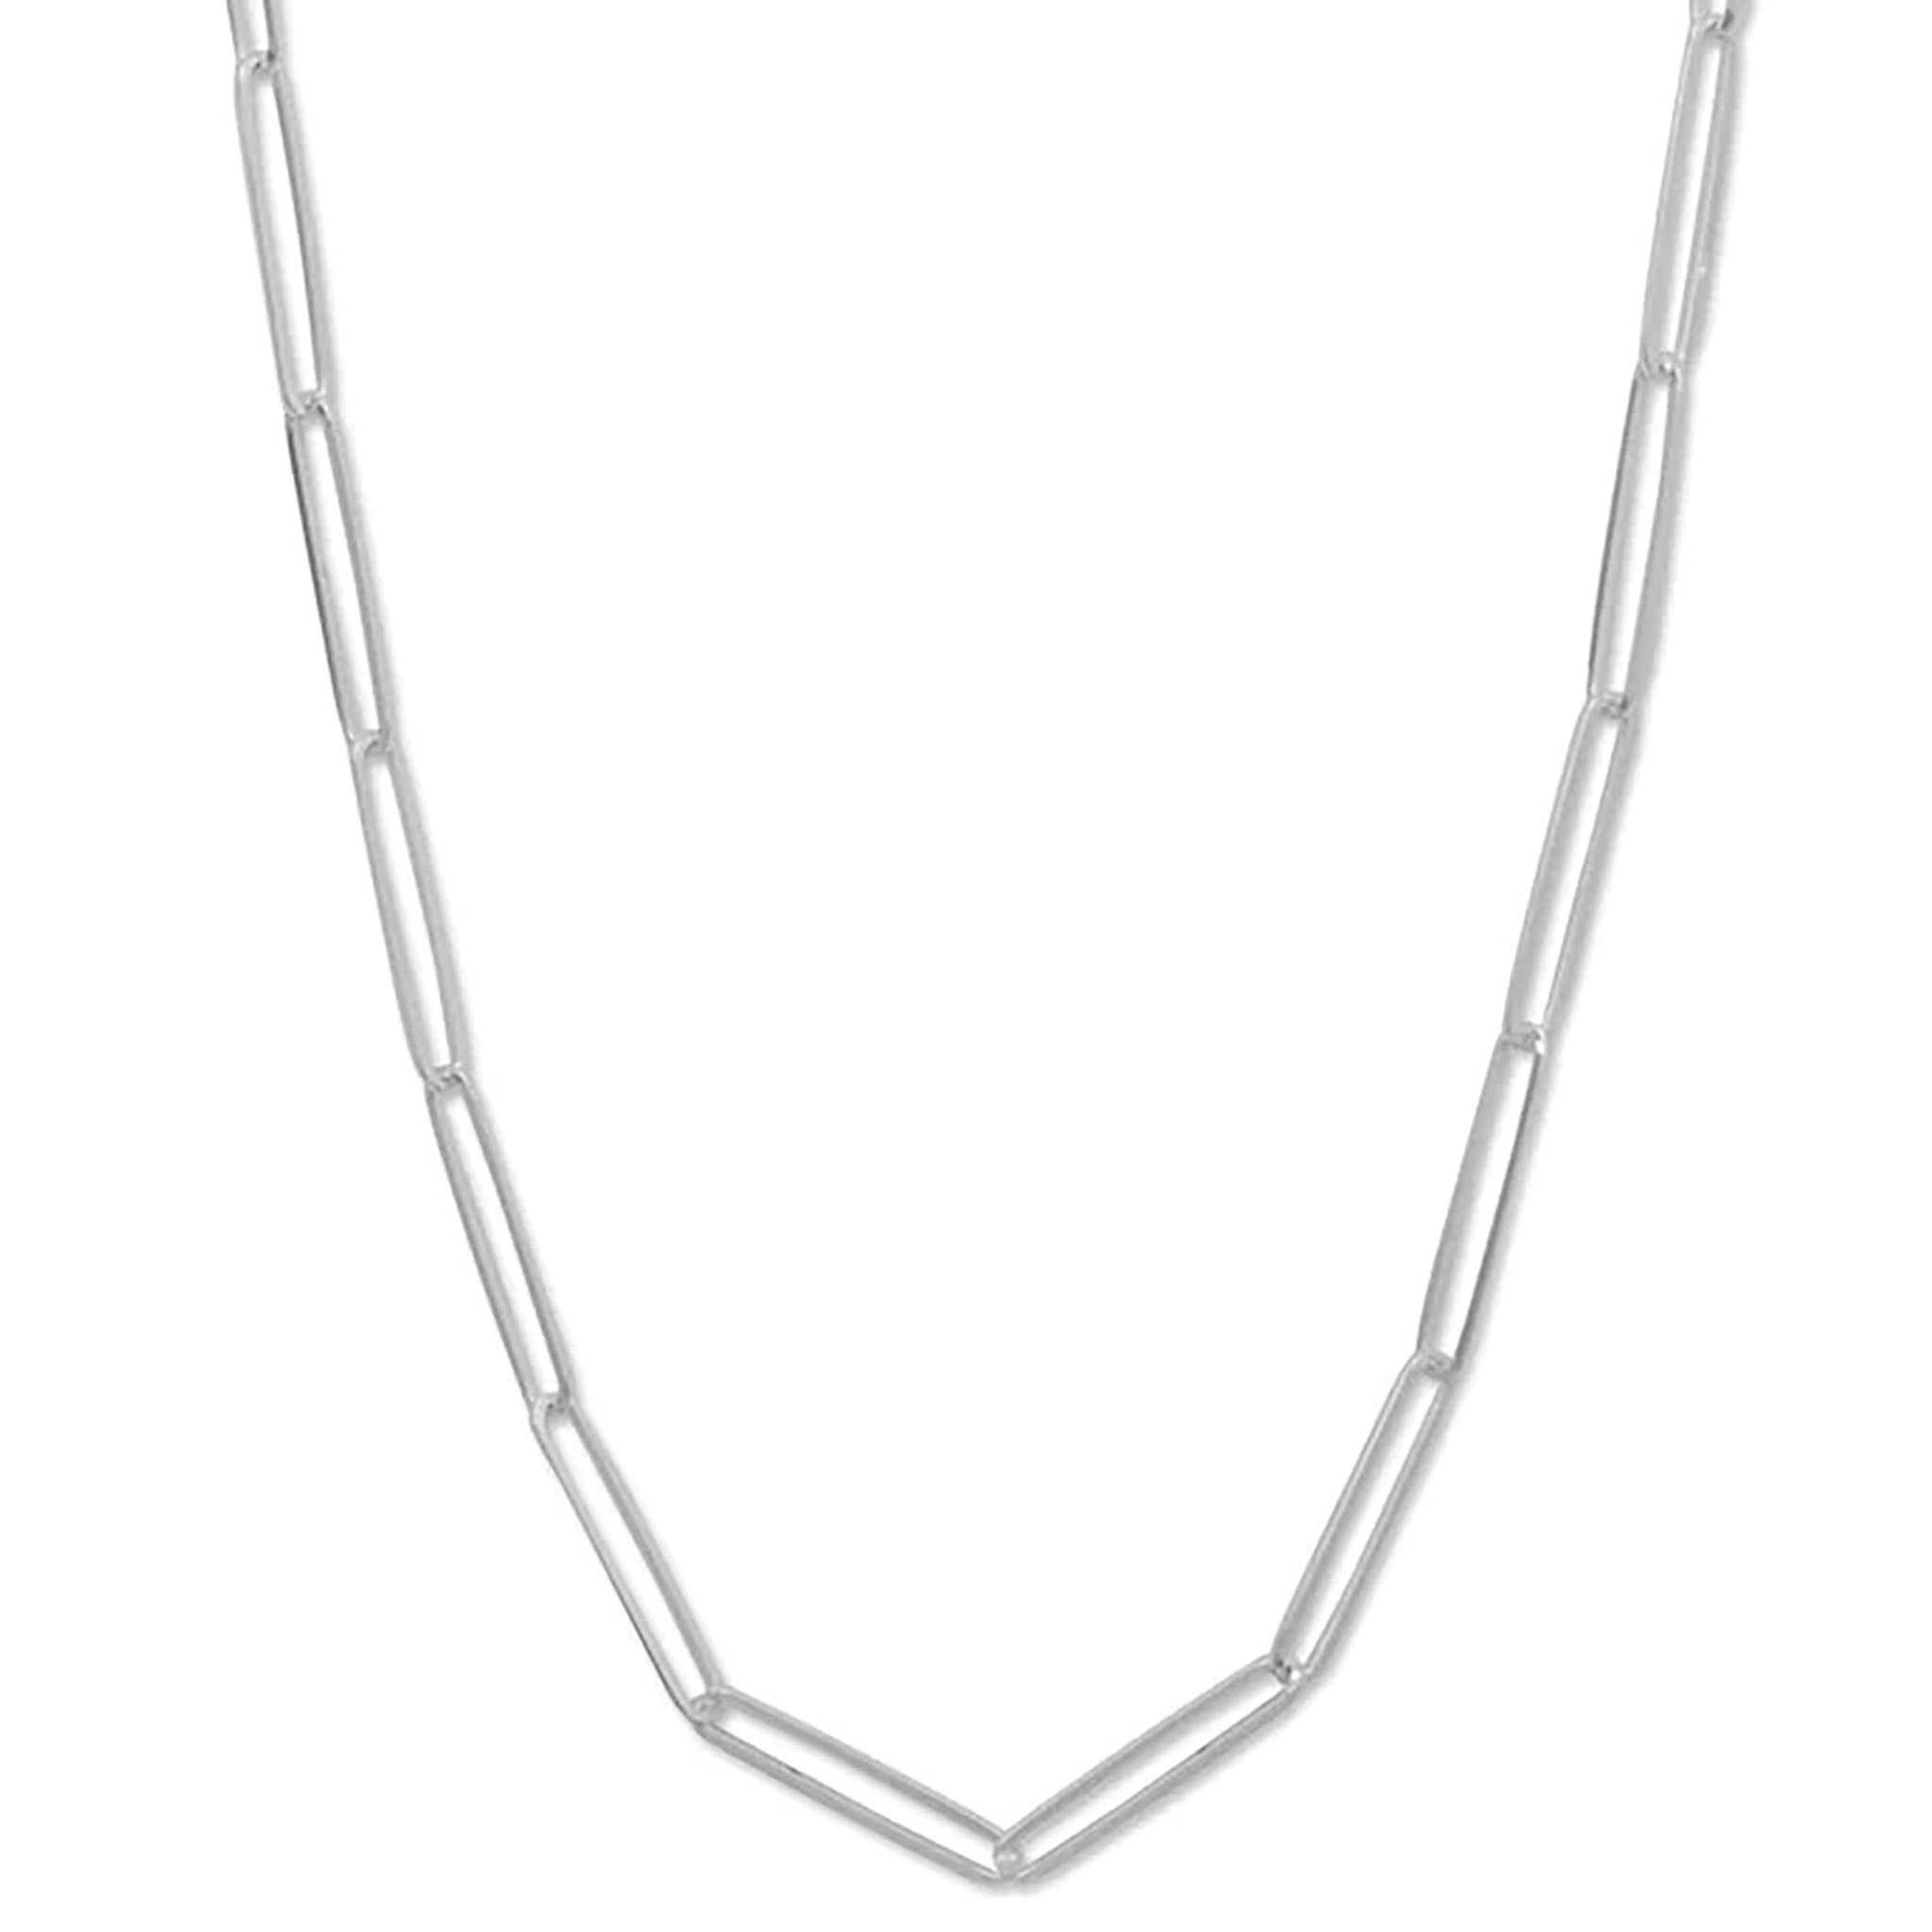 Elongated Paperclip Style Necklace